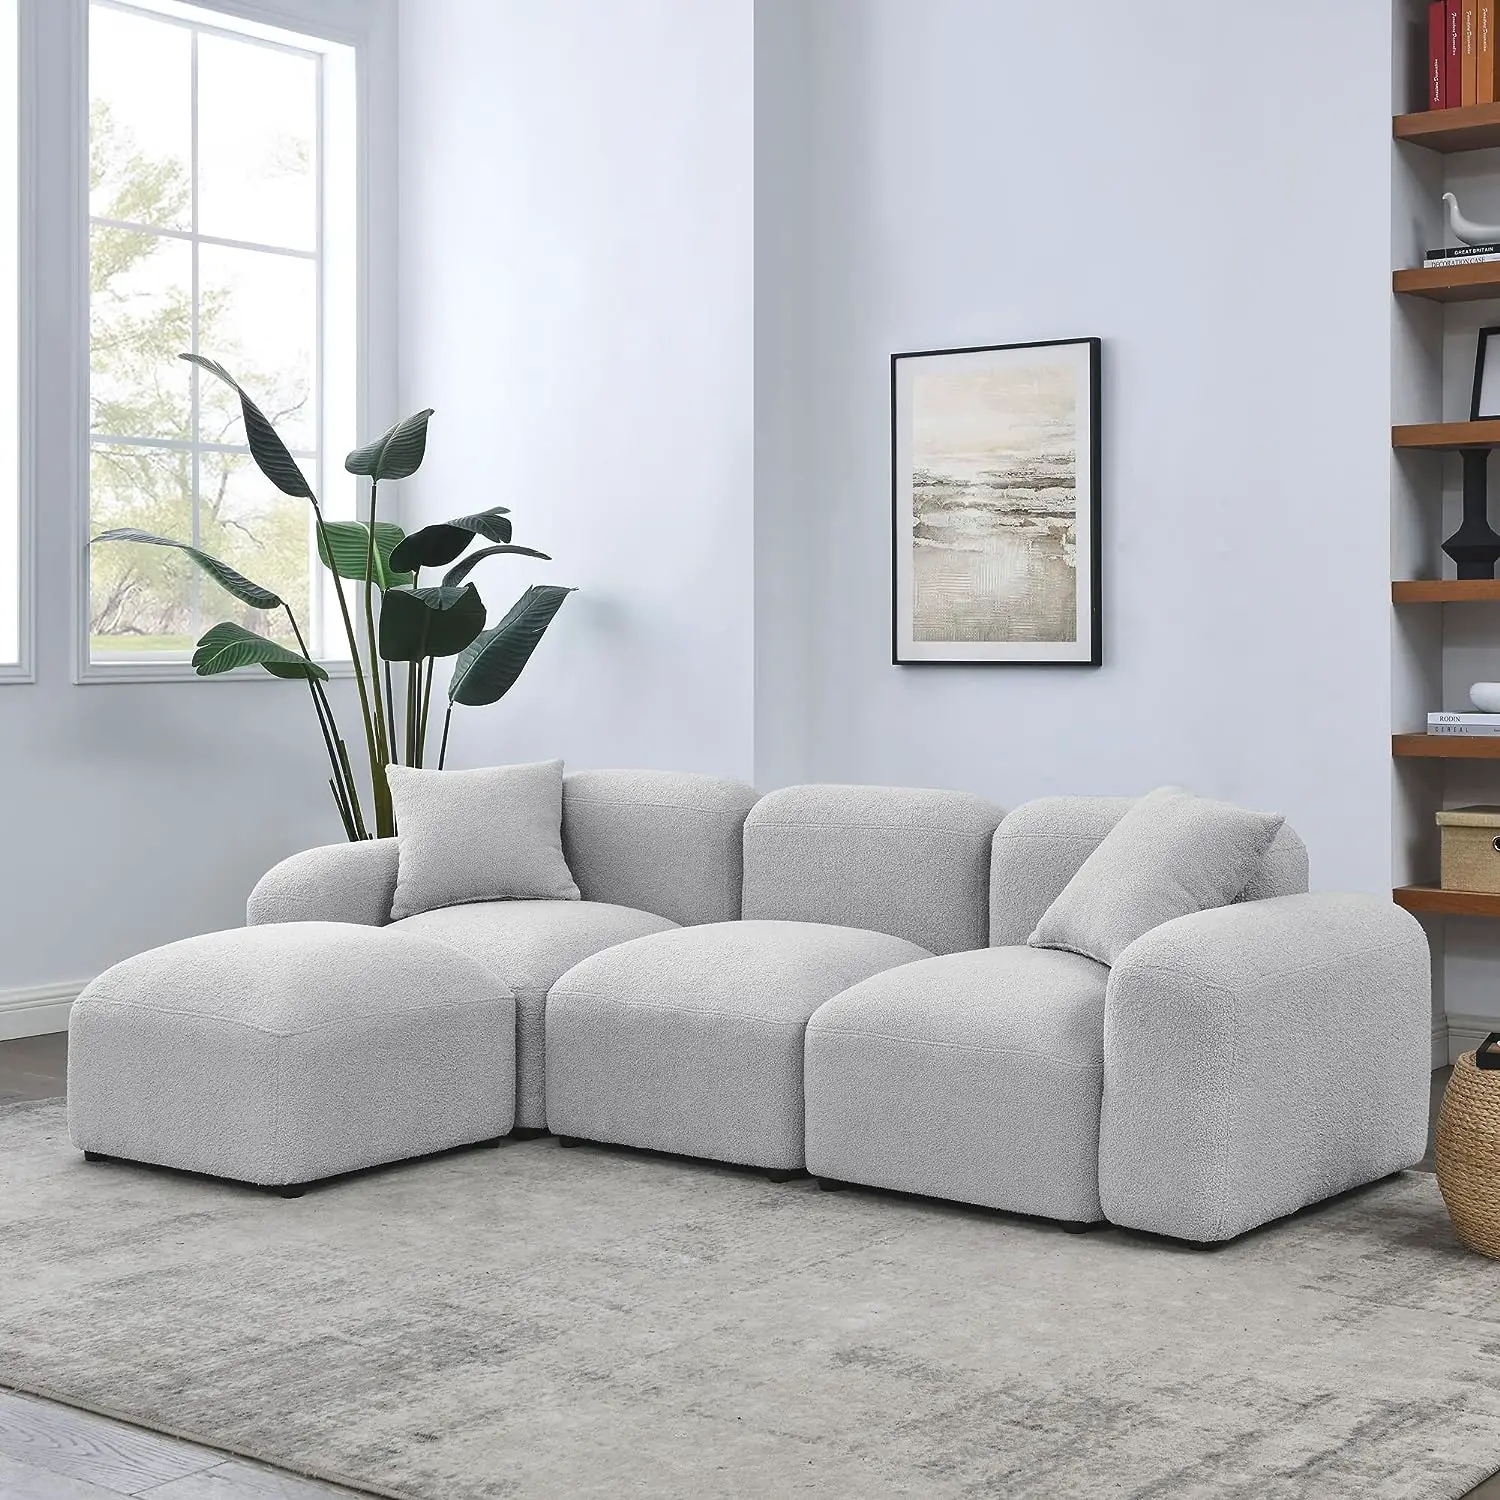 Amazons 12 Hottest Modular Sectional Sofas Of 2023 6 